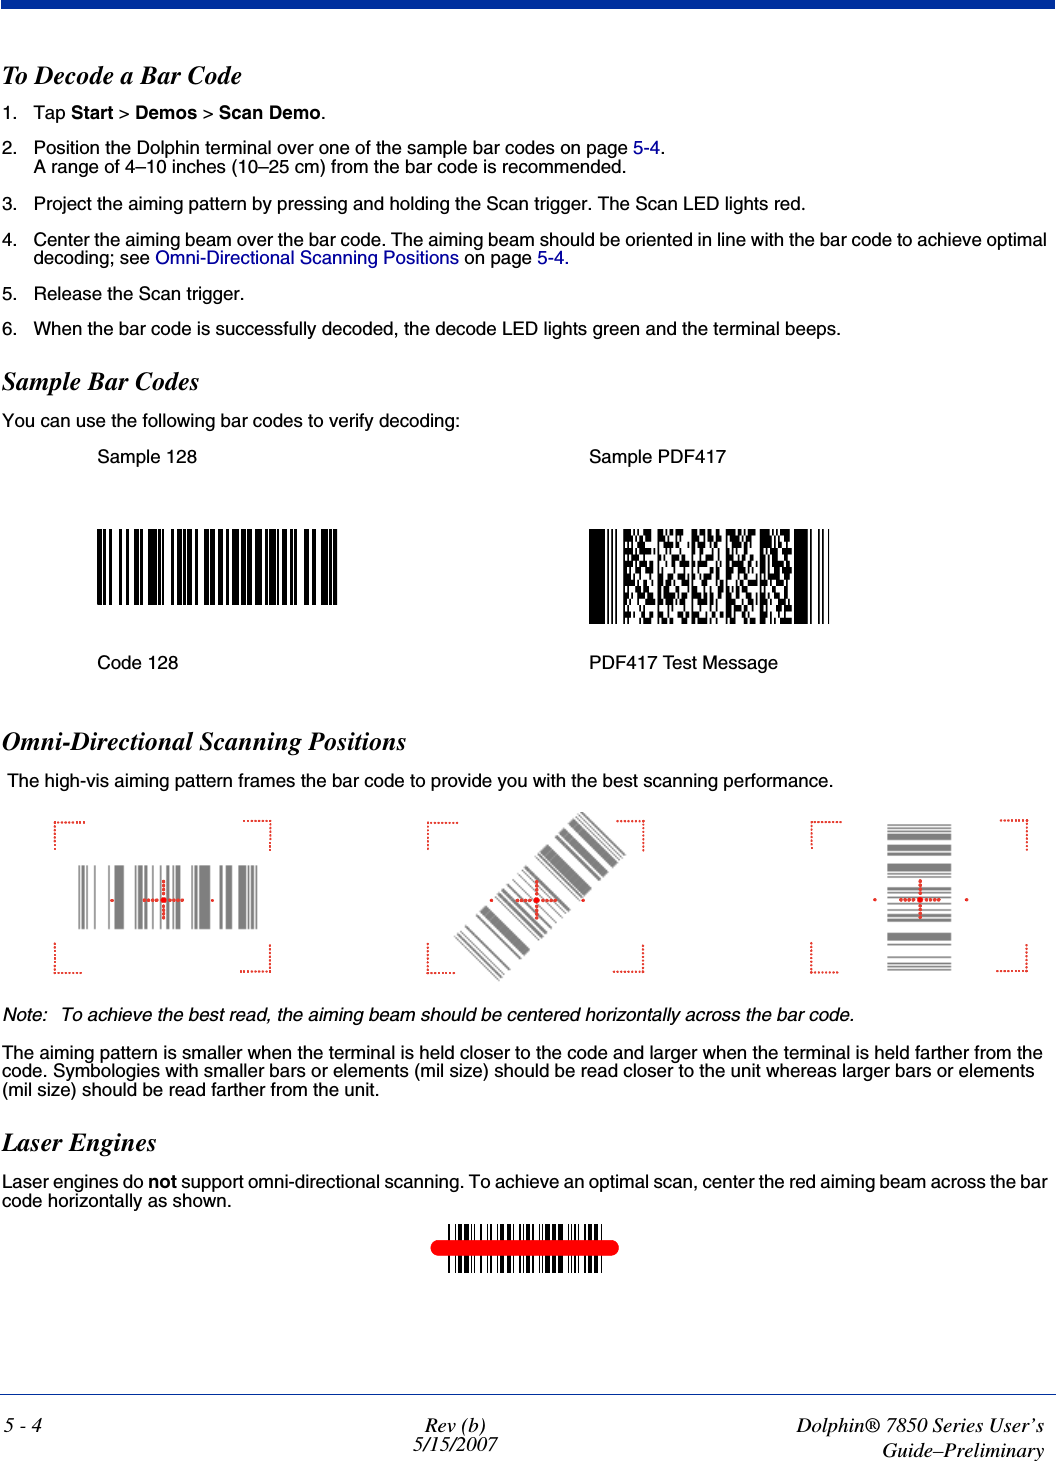 5 - 4 Rev (b)5/15/2007Dolphin® 7850 Series User’sGuide–PreliminaryTo Decode a Bar Code1. Tap Start &gt; Demos &gt; Scan Demo.2. Position the Dolphin terminal over one of the sample bar codes on page 5-4.A range of 4–10 inches (10–25 cm) from the bar code is recommended. 3. Project the aiming pattern by pressing and holding the Scan trigger. The Scan LED lights red.4. Center the aiming beam over the bar code. The aiming beam should be oriented in line with the bar code to achieve optimal decoding; see Omni-Directional Scanning Positions on page 5-4.5. Release the Scan trigger.6. When the bar code is successfully decoded, the decode LED lights green and the terminal beeps.Sample Bar CodesYou can use the following bar codes to verify decoding:Omni-Directional Scanning Positions The high-vis aiming pattern frames the bar code to provide you with the best scanning performance. Note: To achieve the best read, the aiming beam should be centered horizontally across the bar code. The aiming pattern is smaller when the terminal is held closer to the code and larger when the terminal is held farther from the code. Symbologies with smaller bars or elements (mil size) should be read closer to the unit whereas larger bars or elements (mil size) should be read farther from the unit.Laser EnginesLaser engines do not support omni-directional scanning. To achieve an optimal scan, center the red aiming beam across the bar code horizontally as shown.Sample 128 Sample PDF417Code 128 PDF417 Test Message